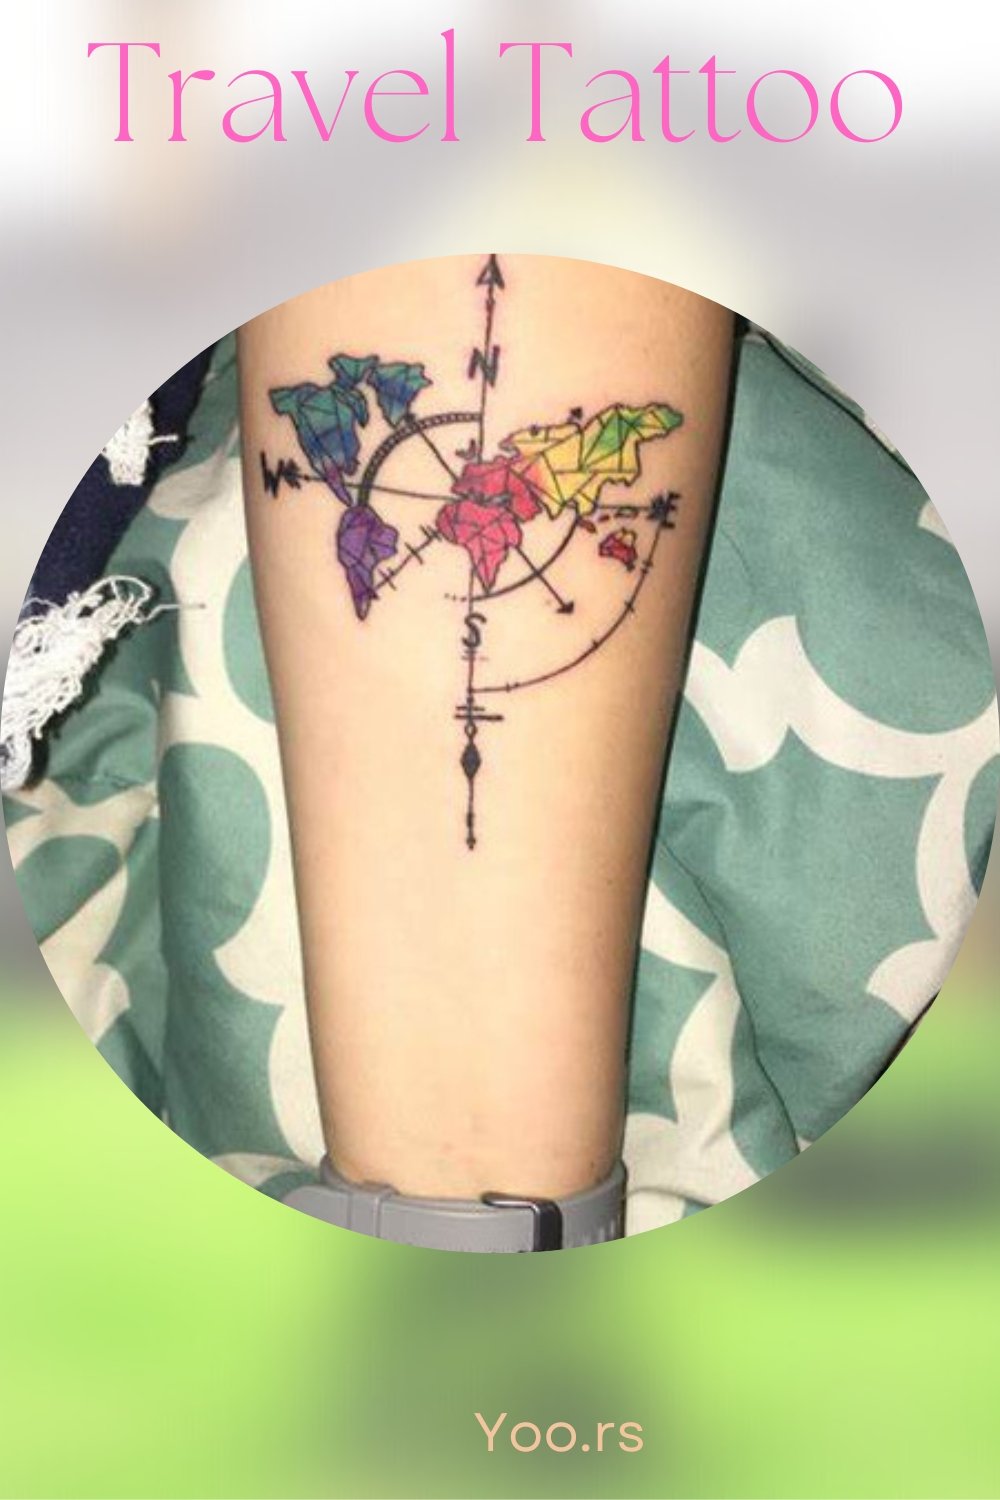 30 Travel Tattoos You Should Totally Get If Youre A Wanderer By Heart